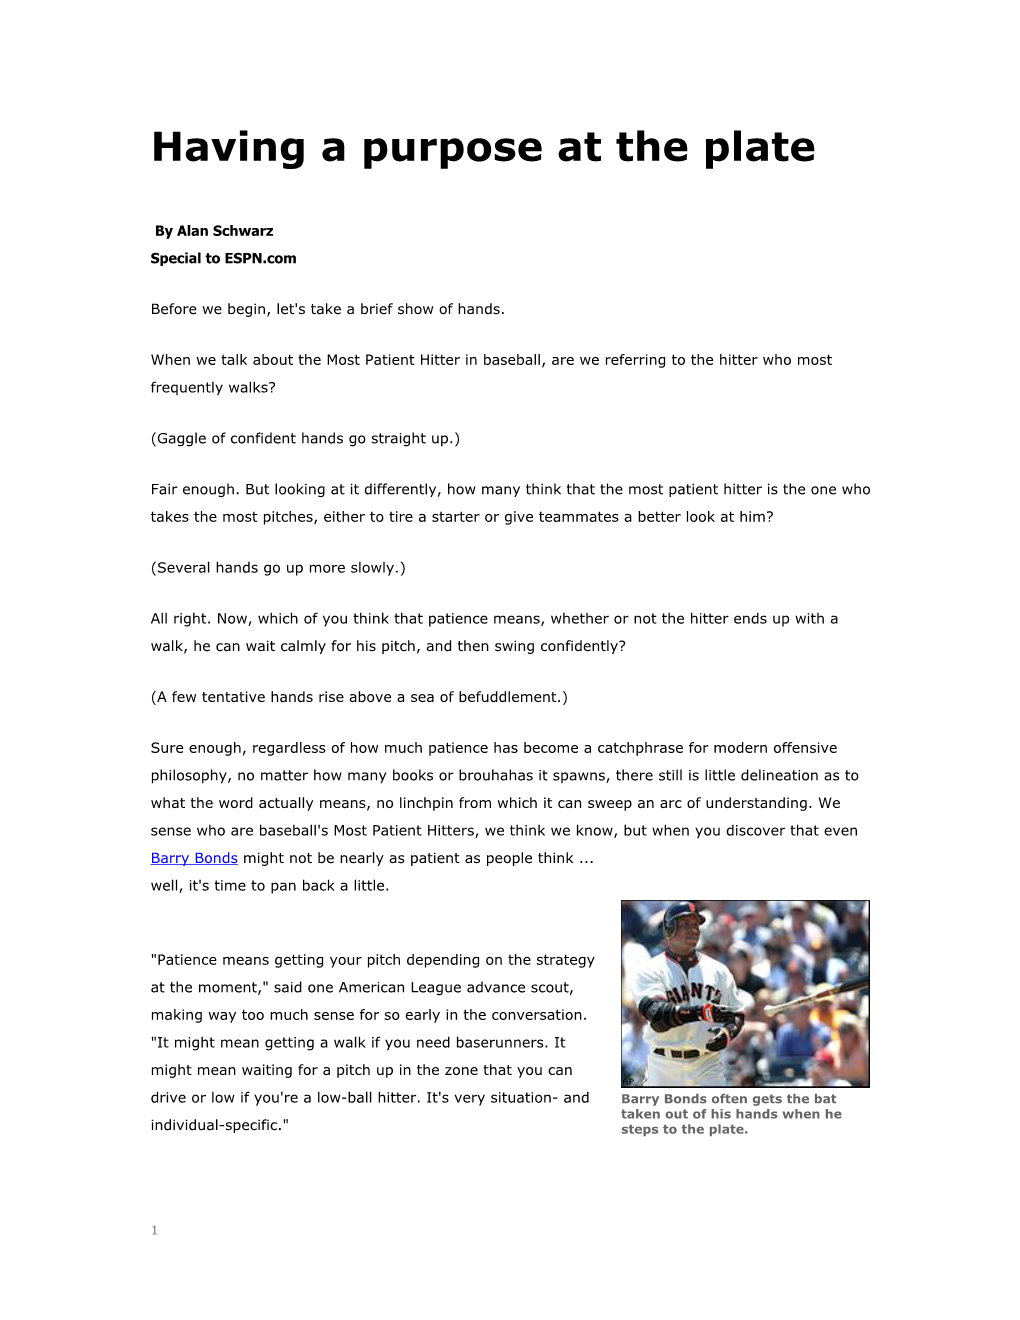 Purpose at the Plate